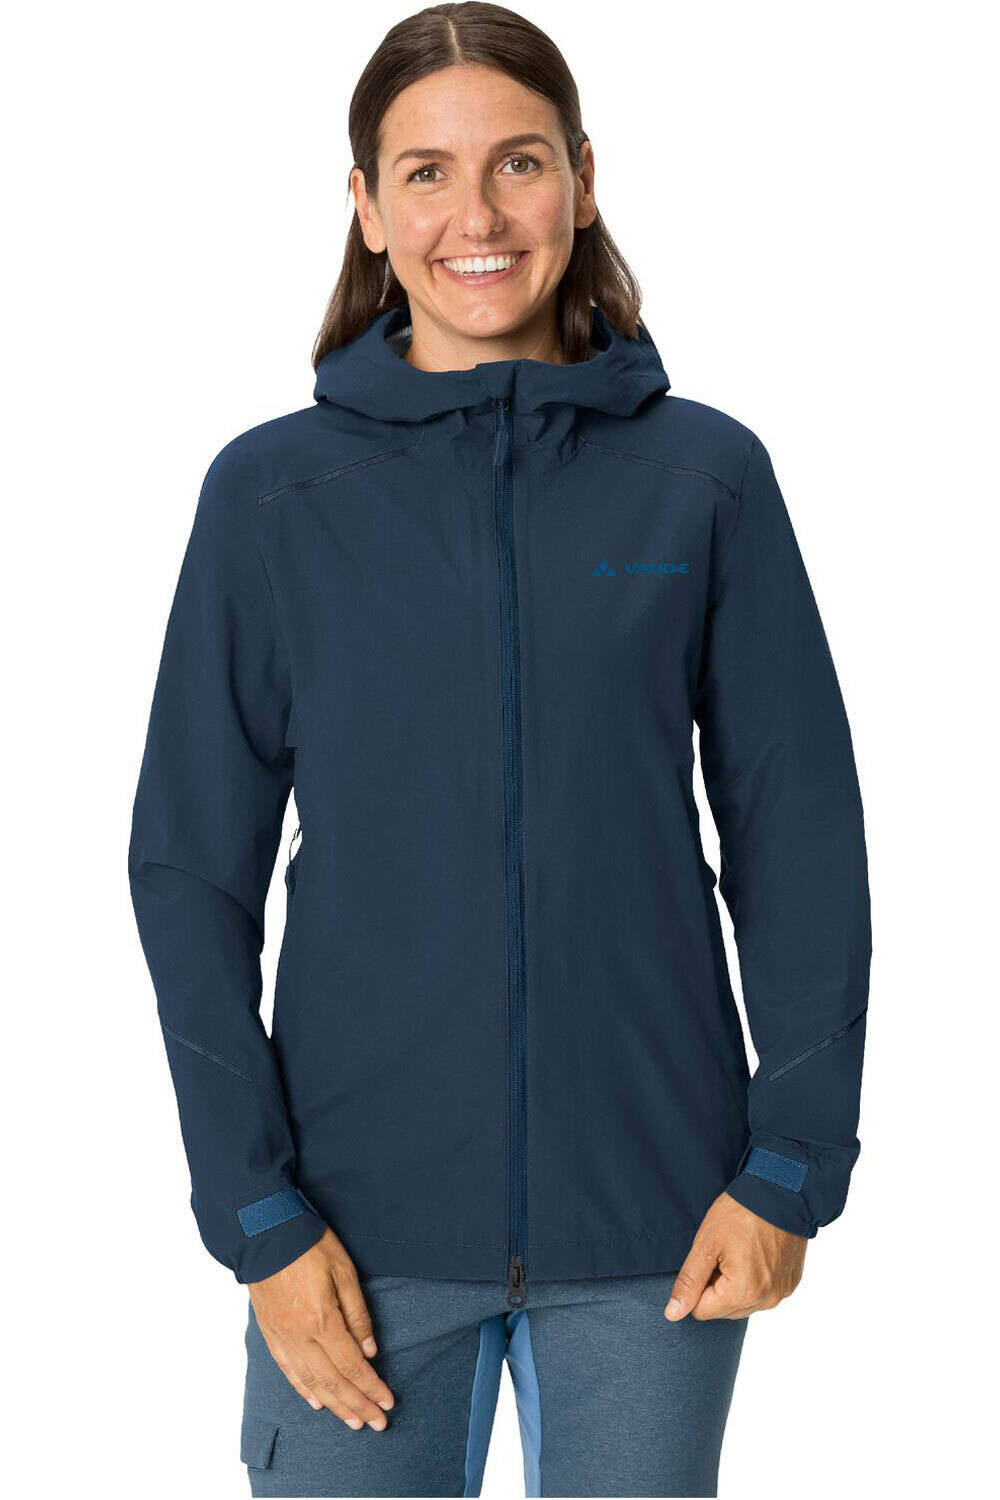 Vaude chaqueta impermeable ciclismo mujer Women's Yaras Jacket IV vista frontal